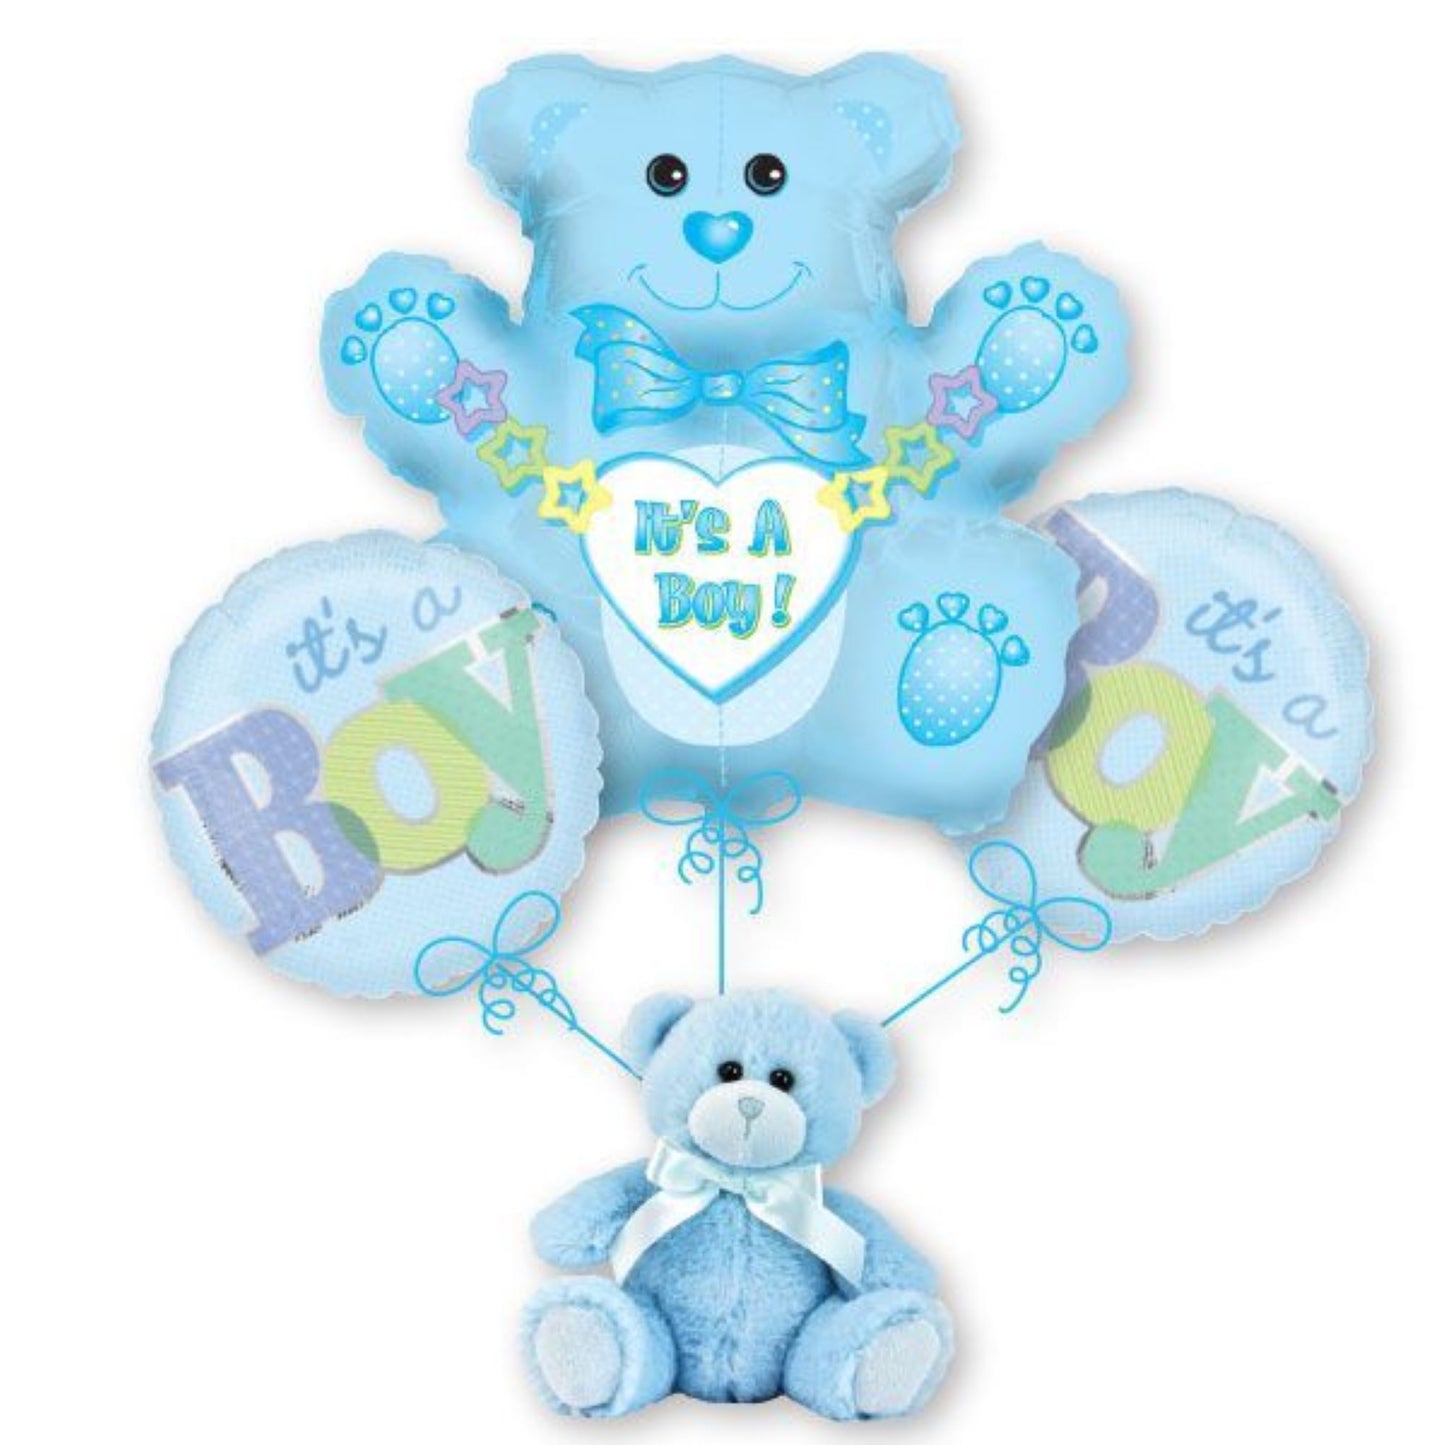 Copy of Balloon Bouquet with Teddy bear - blue